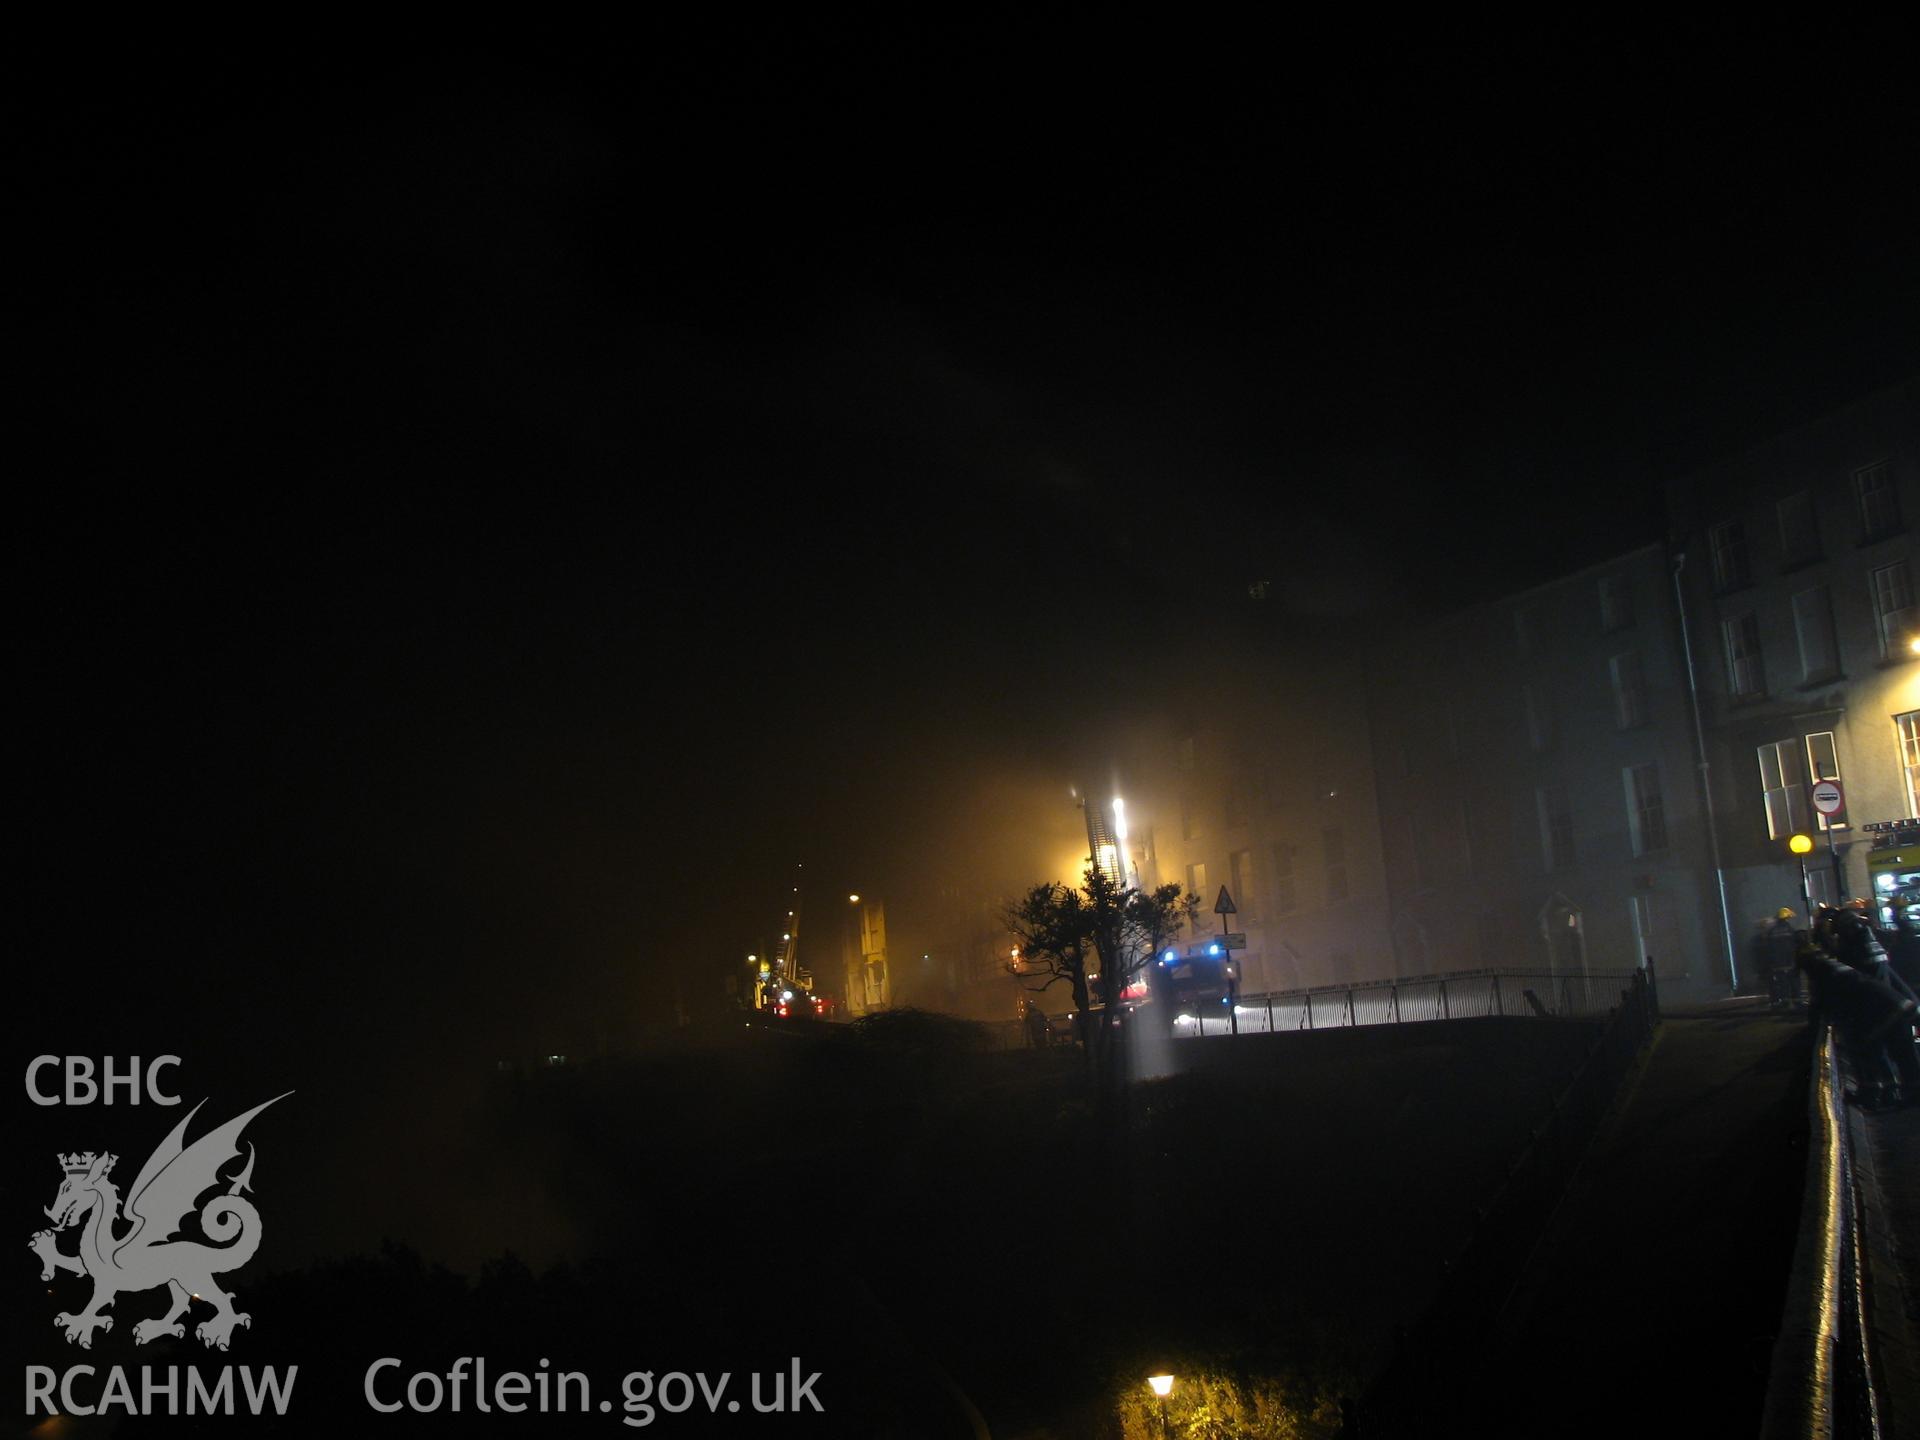 Colour digital photograph of The Royal Gatehouse Hotel, on fire.